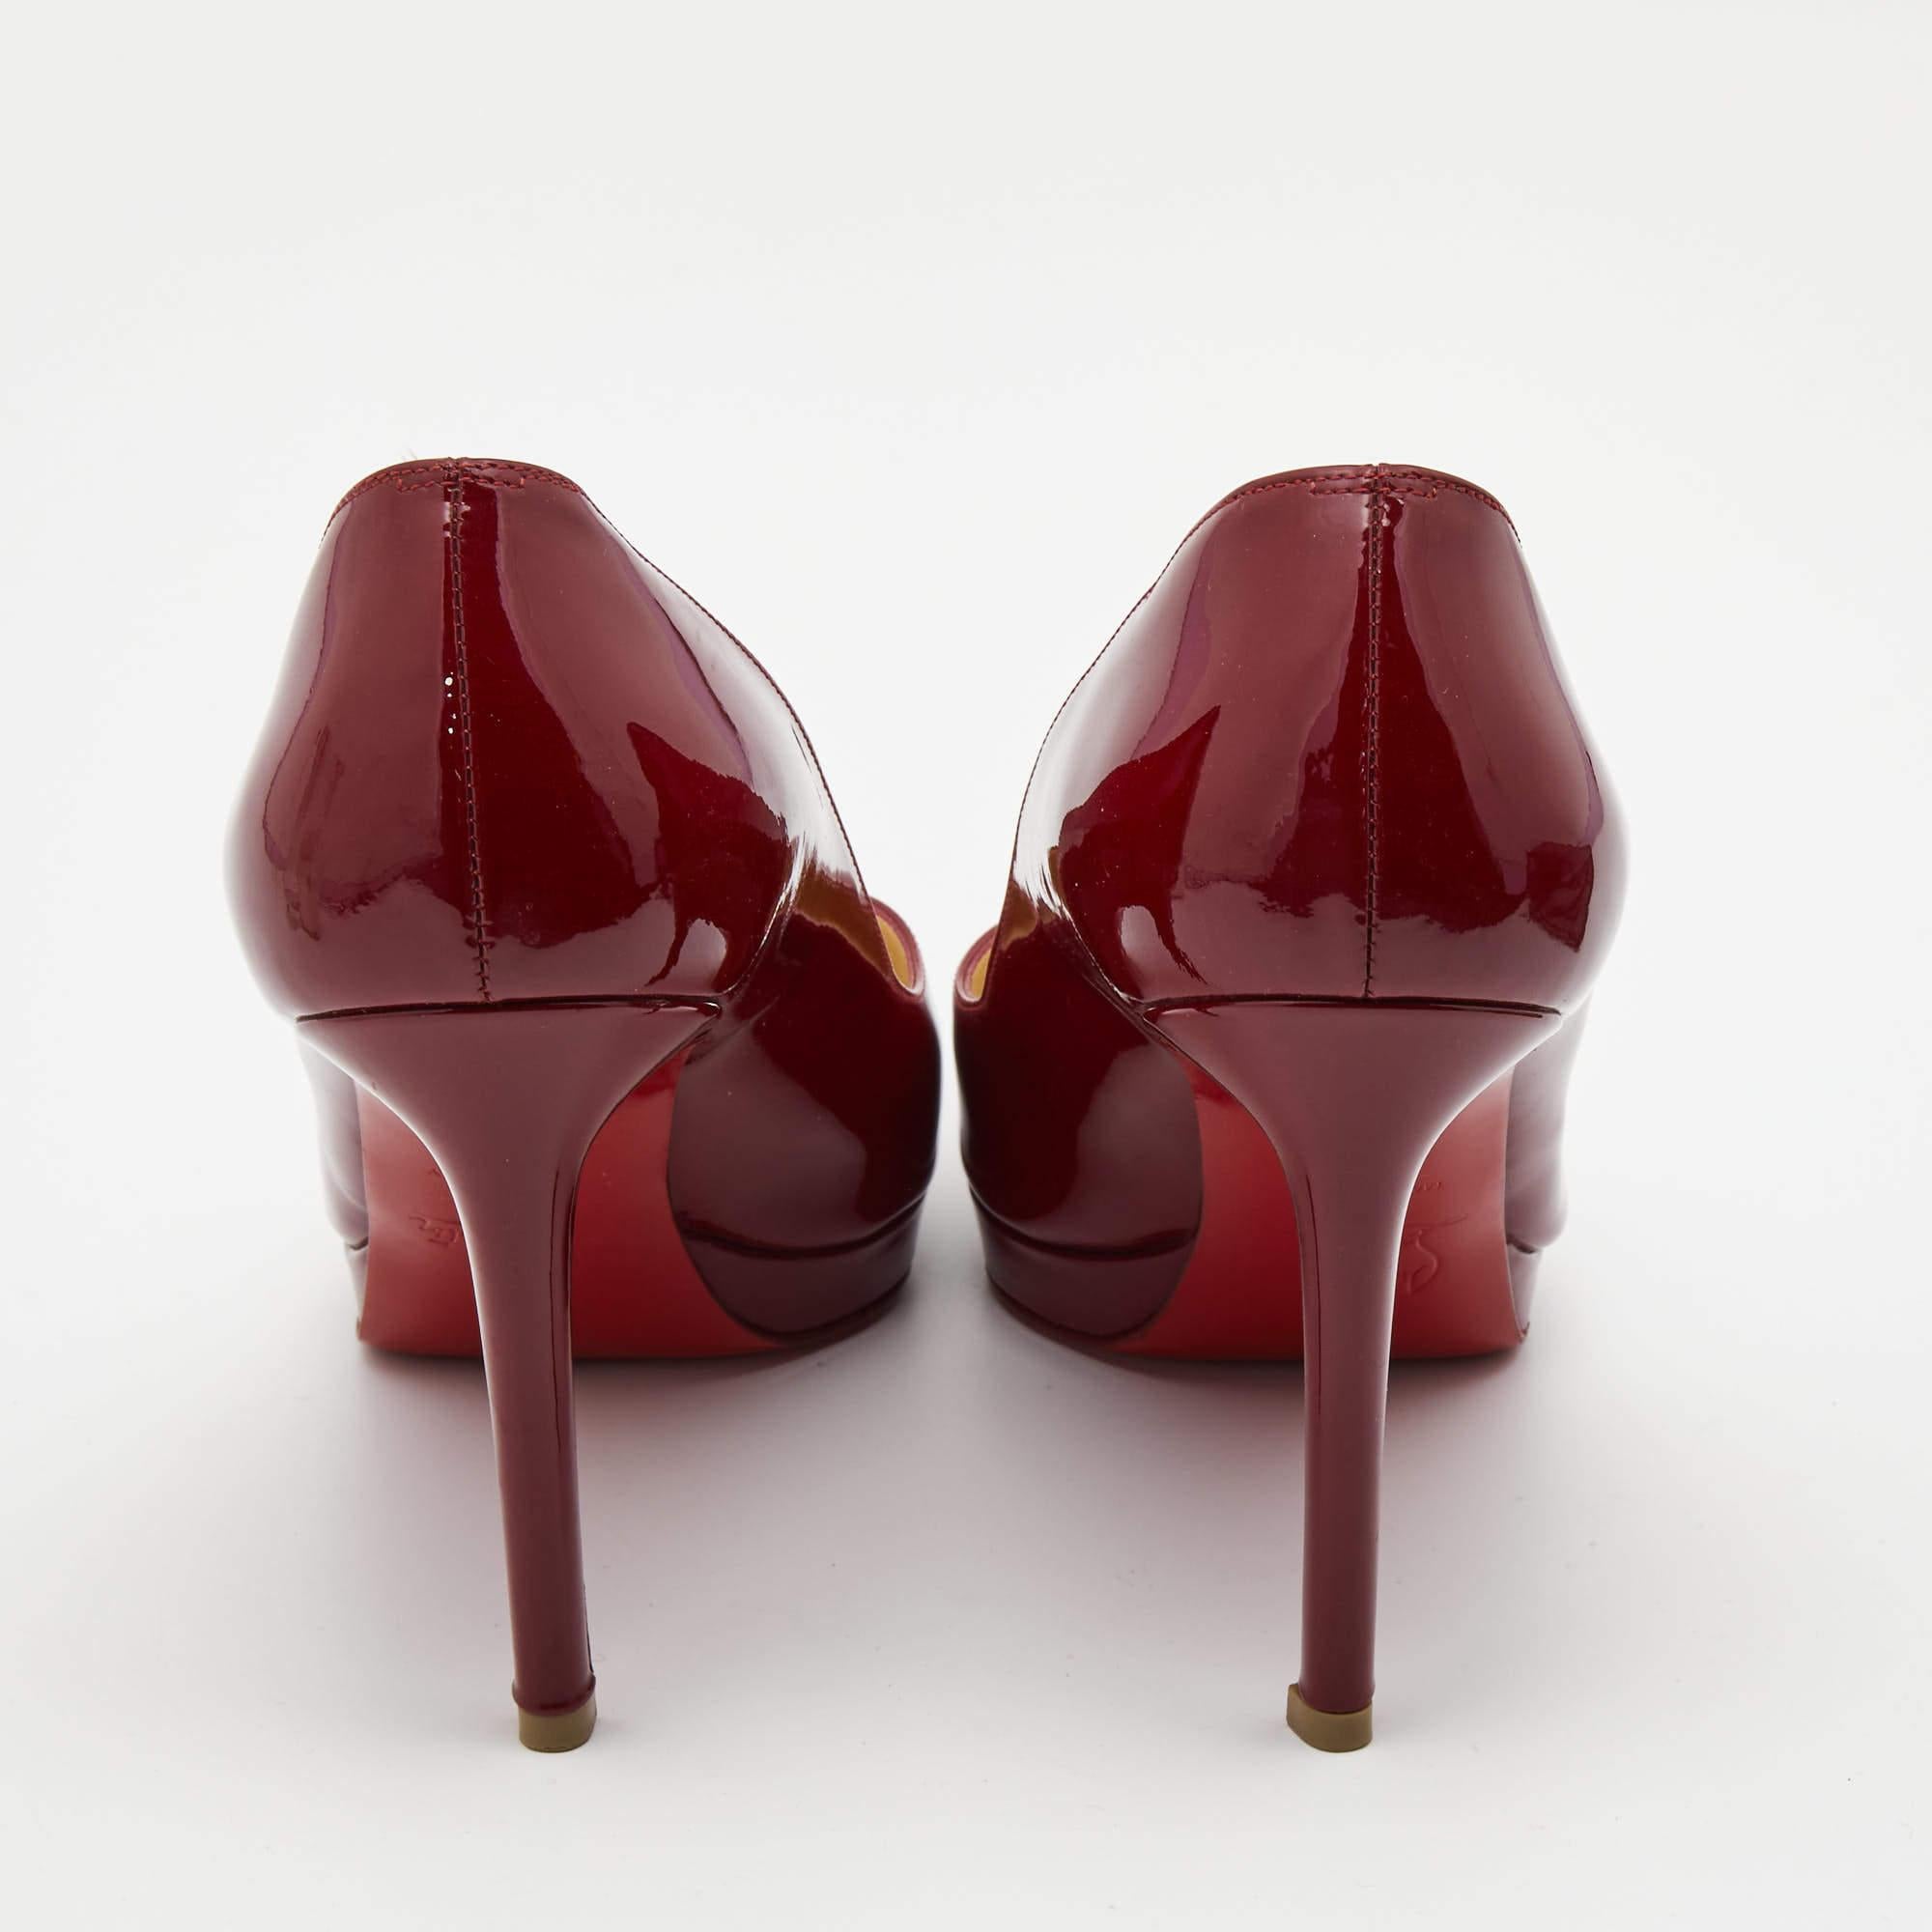 Christian Louboutin Burgundy Patent Leather Pigalle Plato Pumps Size 37.5 2